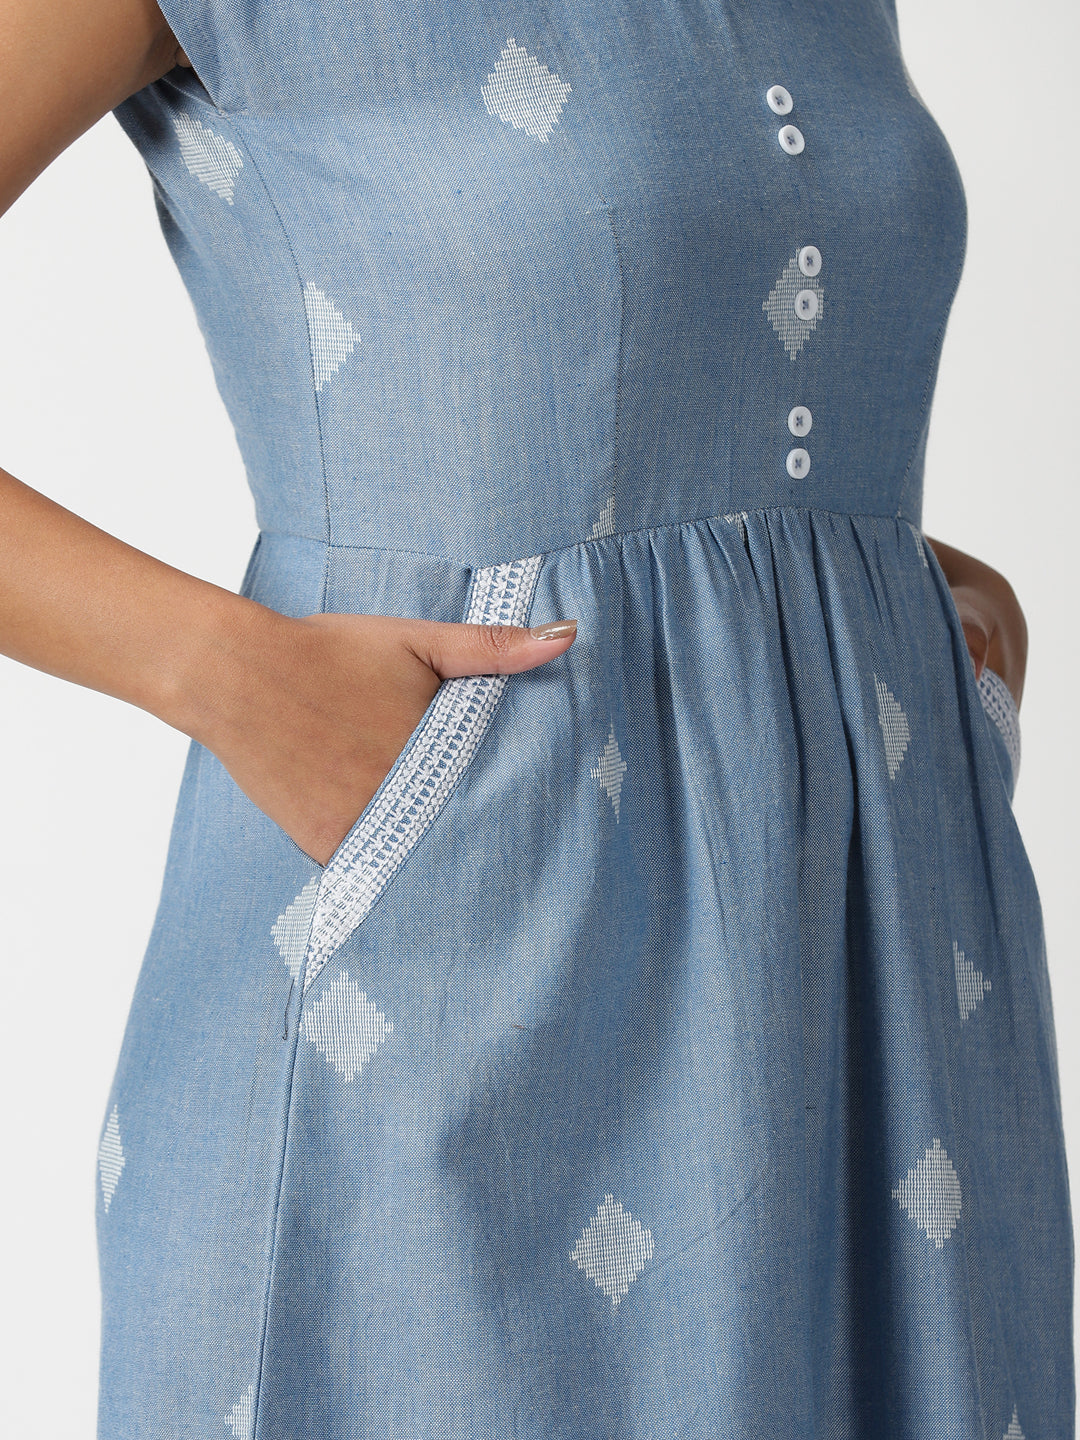 Blue Geometric Woven Design Midi Dress with Embroidered Pockets